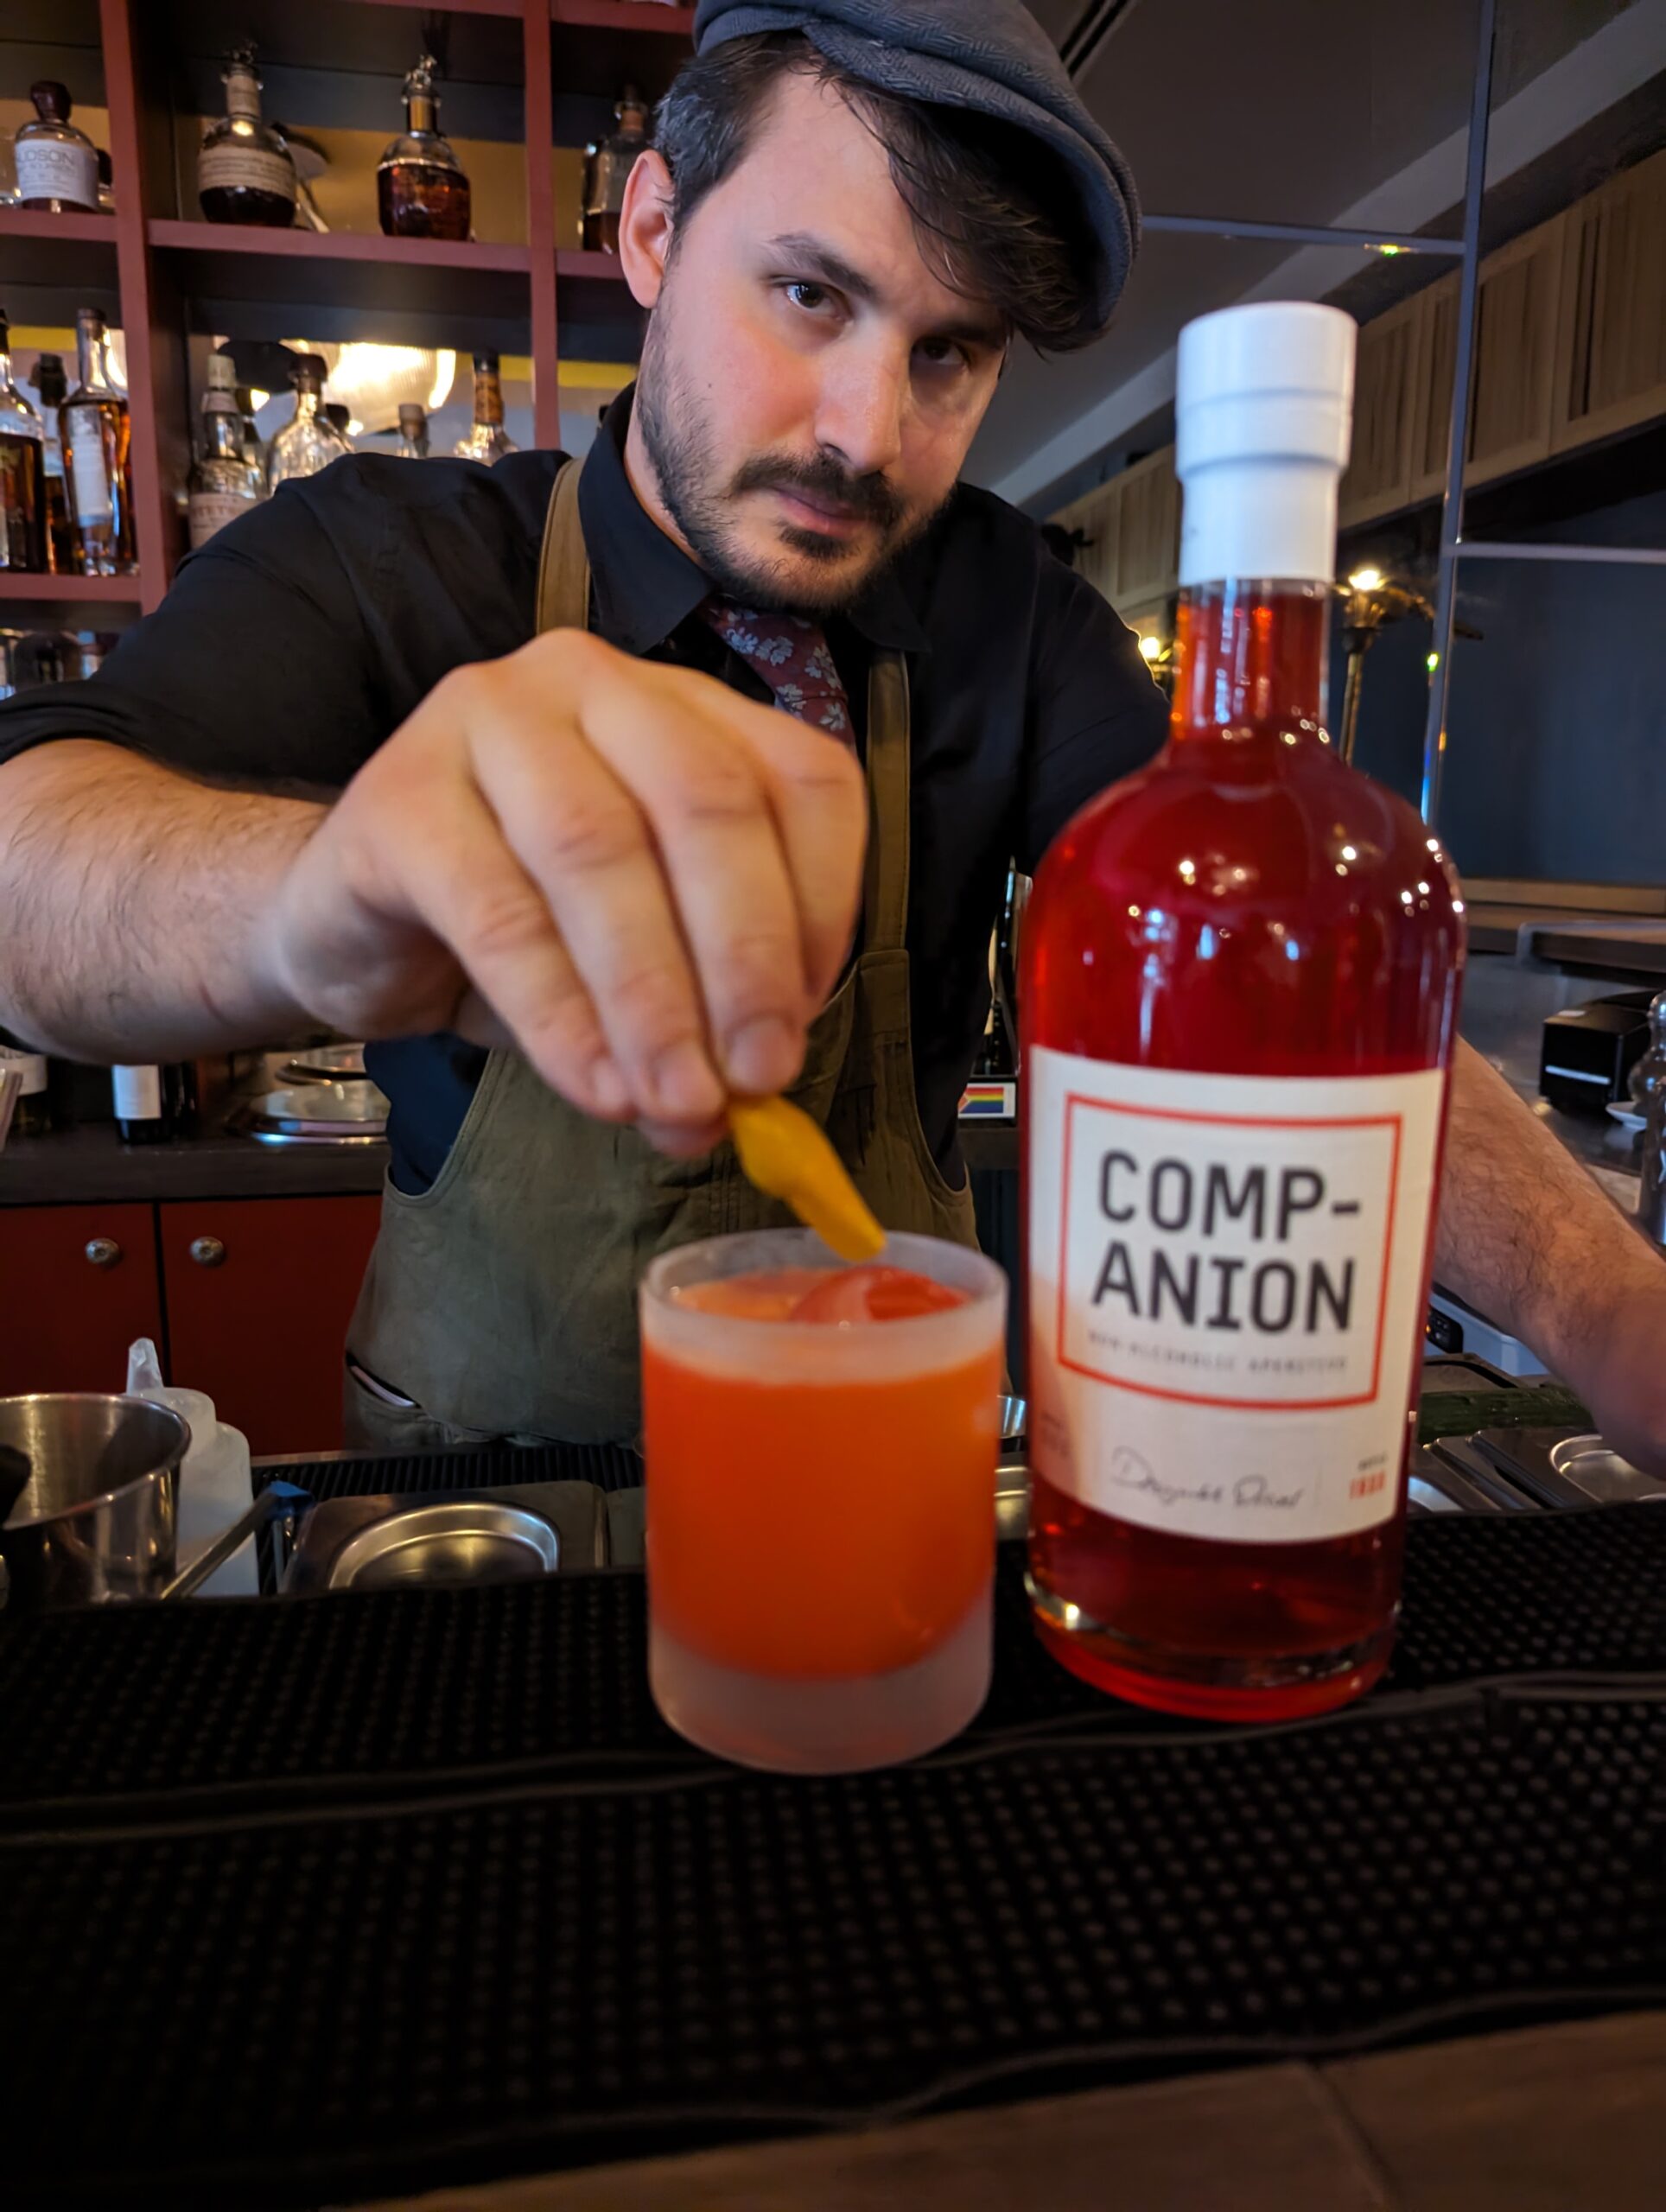 A barkeep adding an orange slice to a drink mixed with the Companion aperitivo.